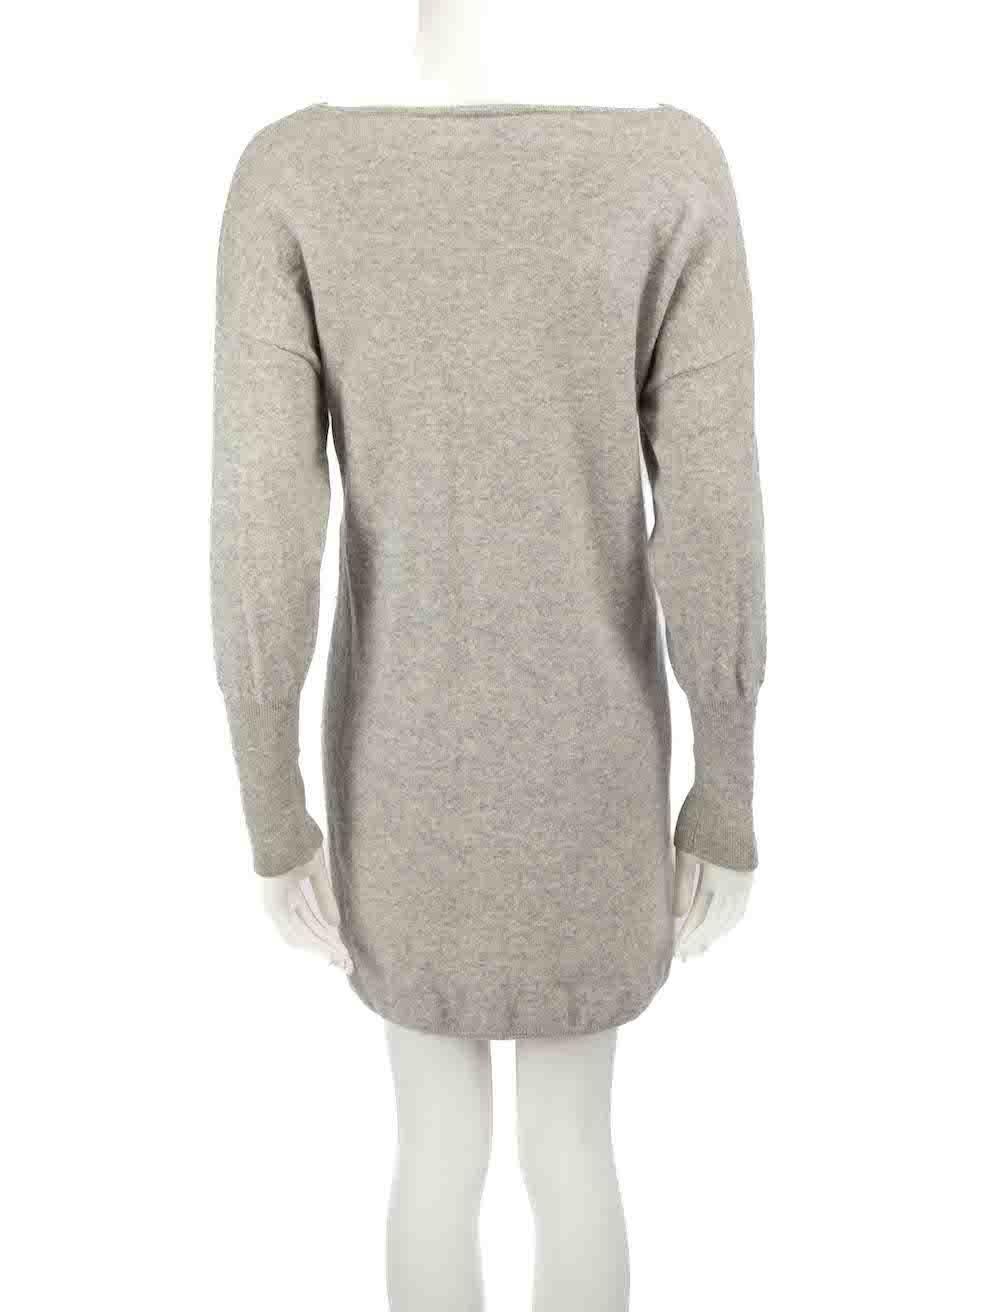 Allude Grey Wool Knitted Sweater Dress Size S In Good Condition For Sale In London, GB